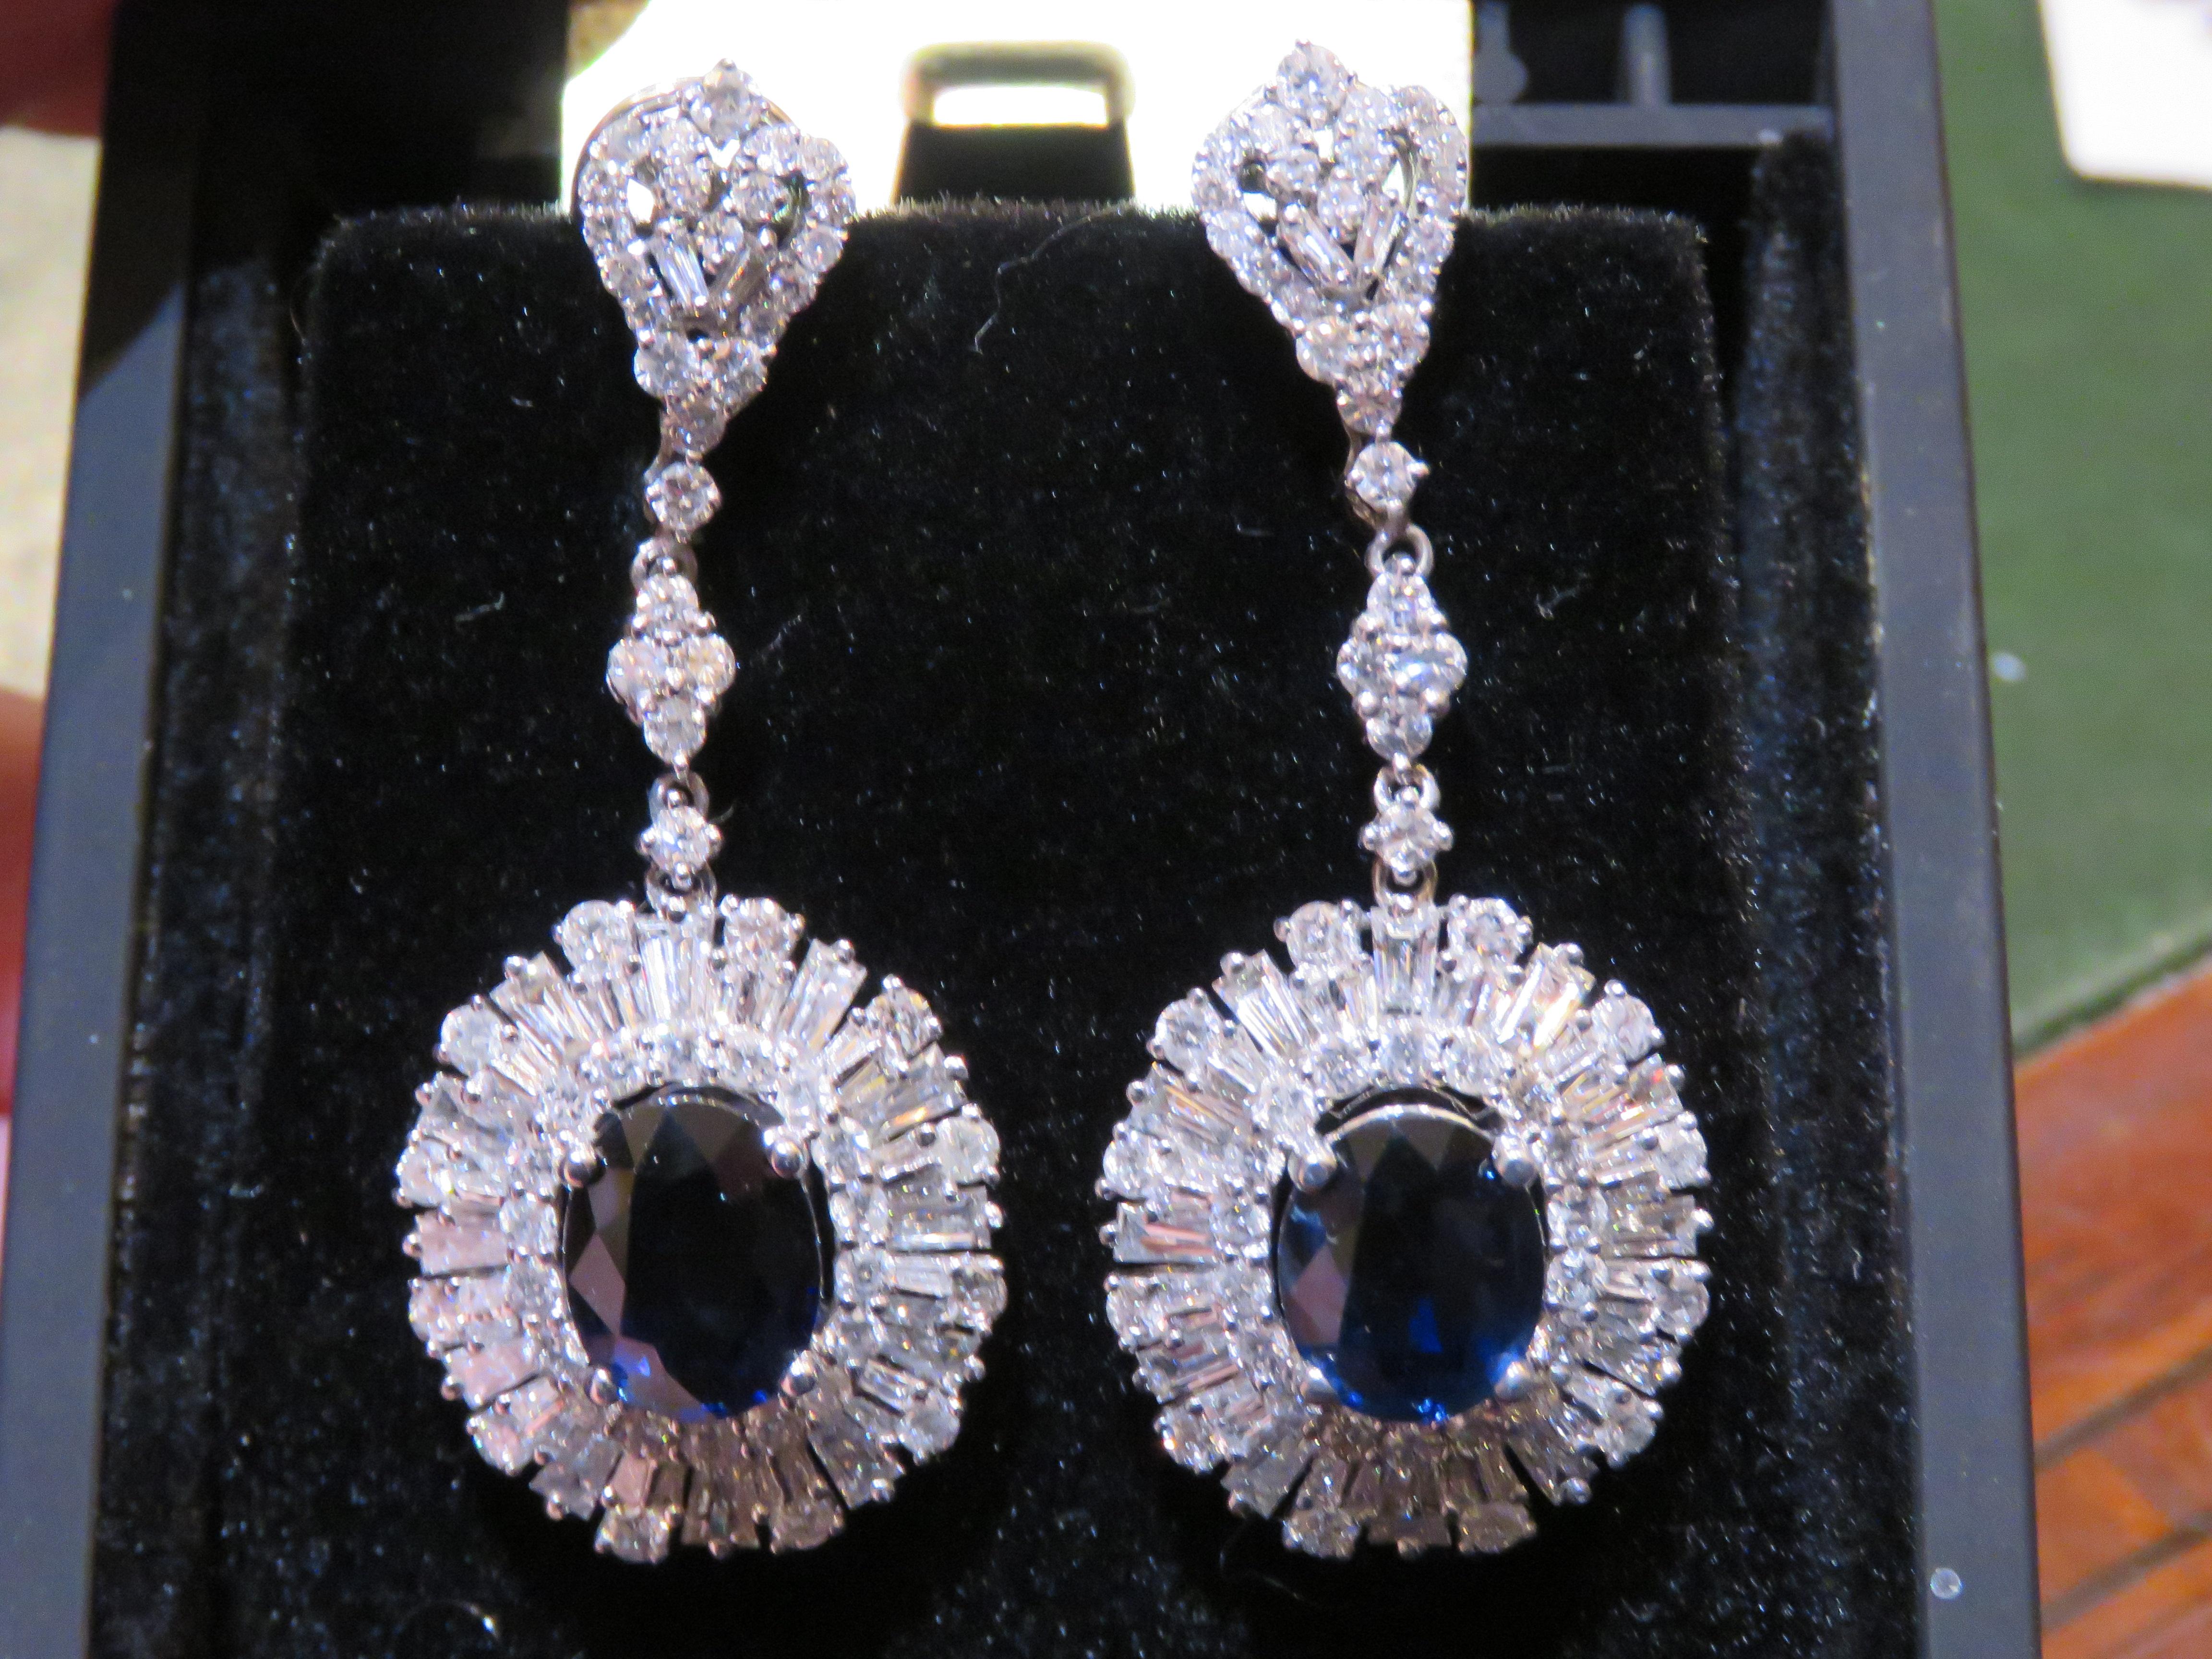 The Following Items we are offering is a Rare Important Radiant and Elaborate 18KT White Gold Large Ceylon Sapphire and Diamond Earrings. Earrings are comprised of Approx 10 Carats of Finely Set Glittering Ceylon Sapphire Stones and Diamonds. The